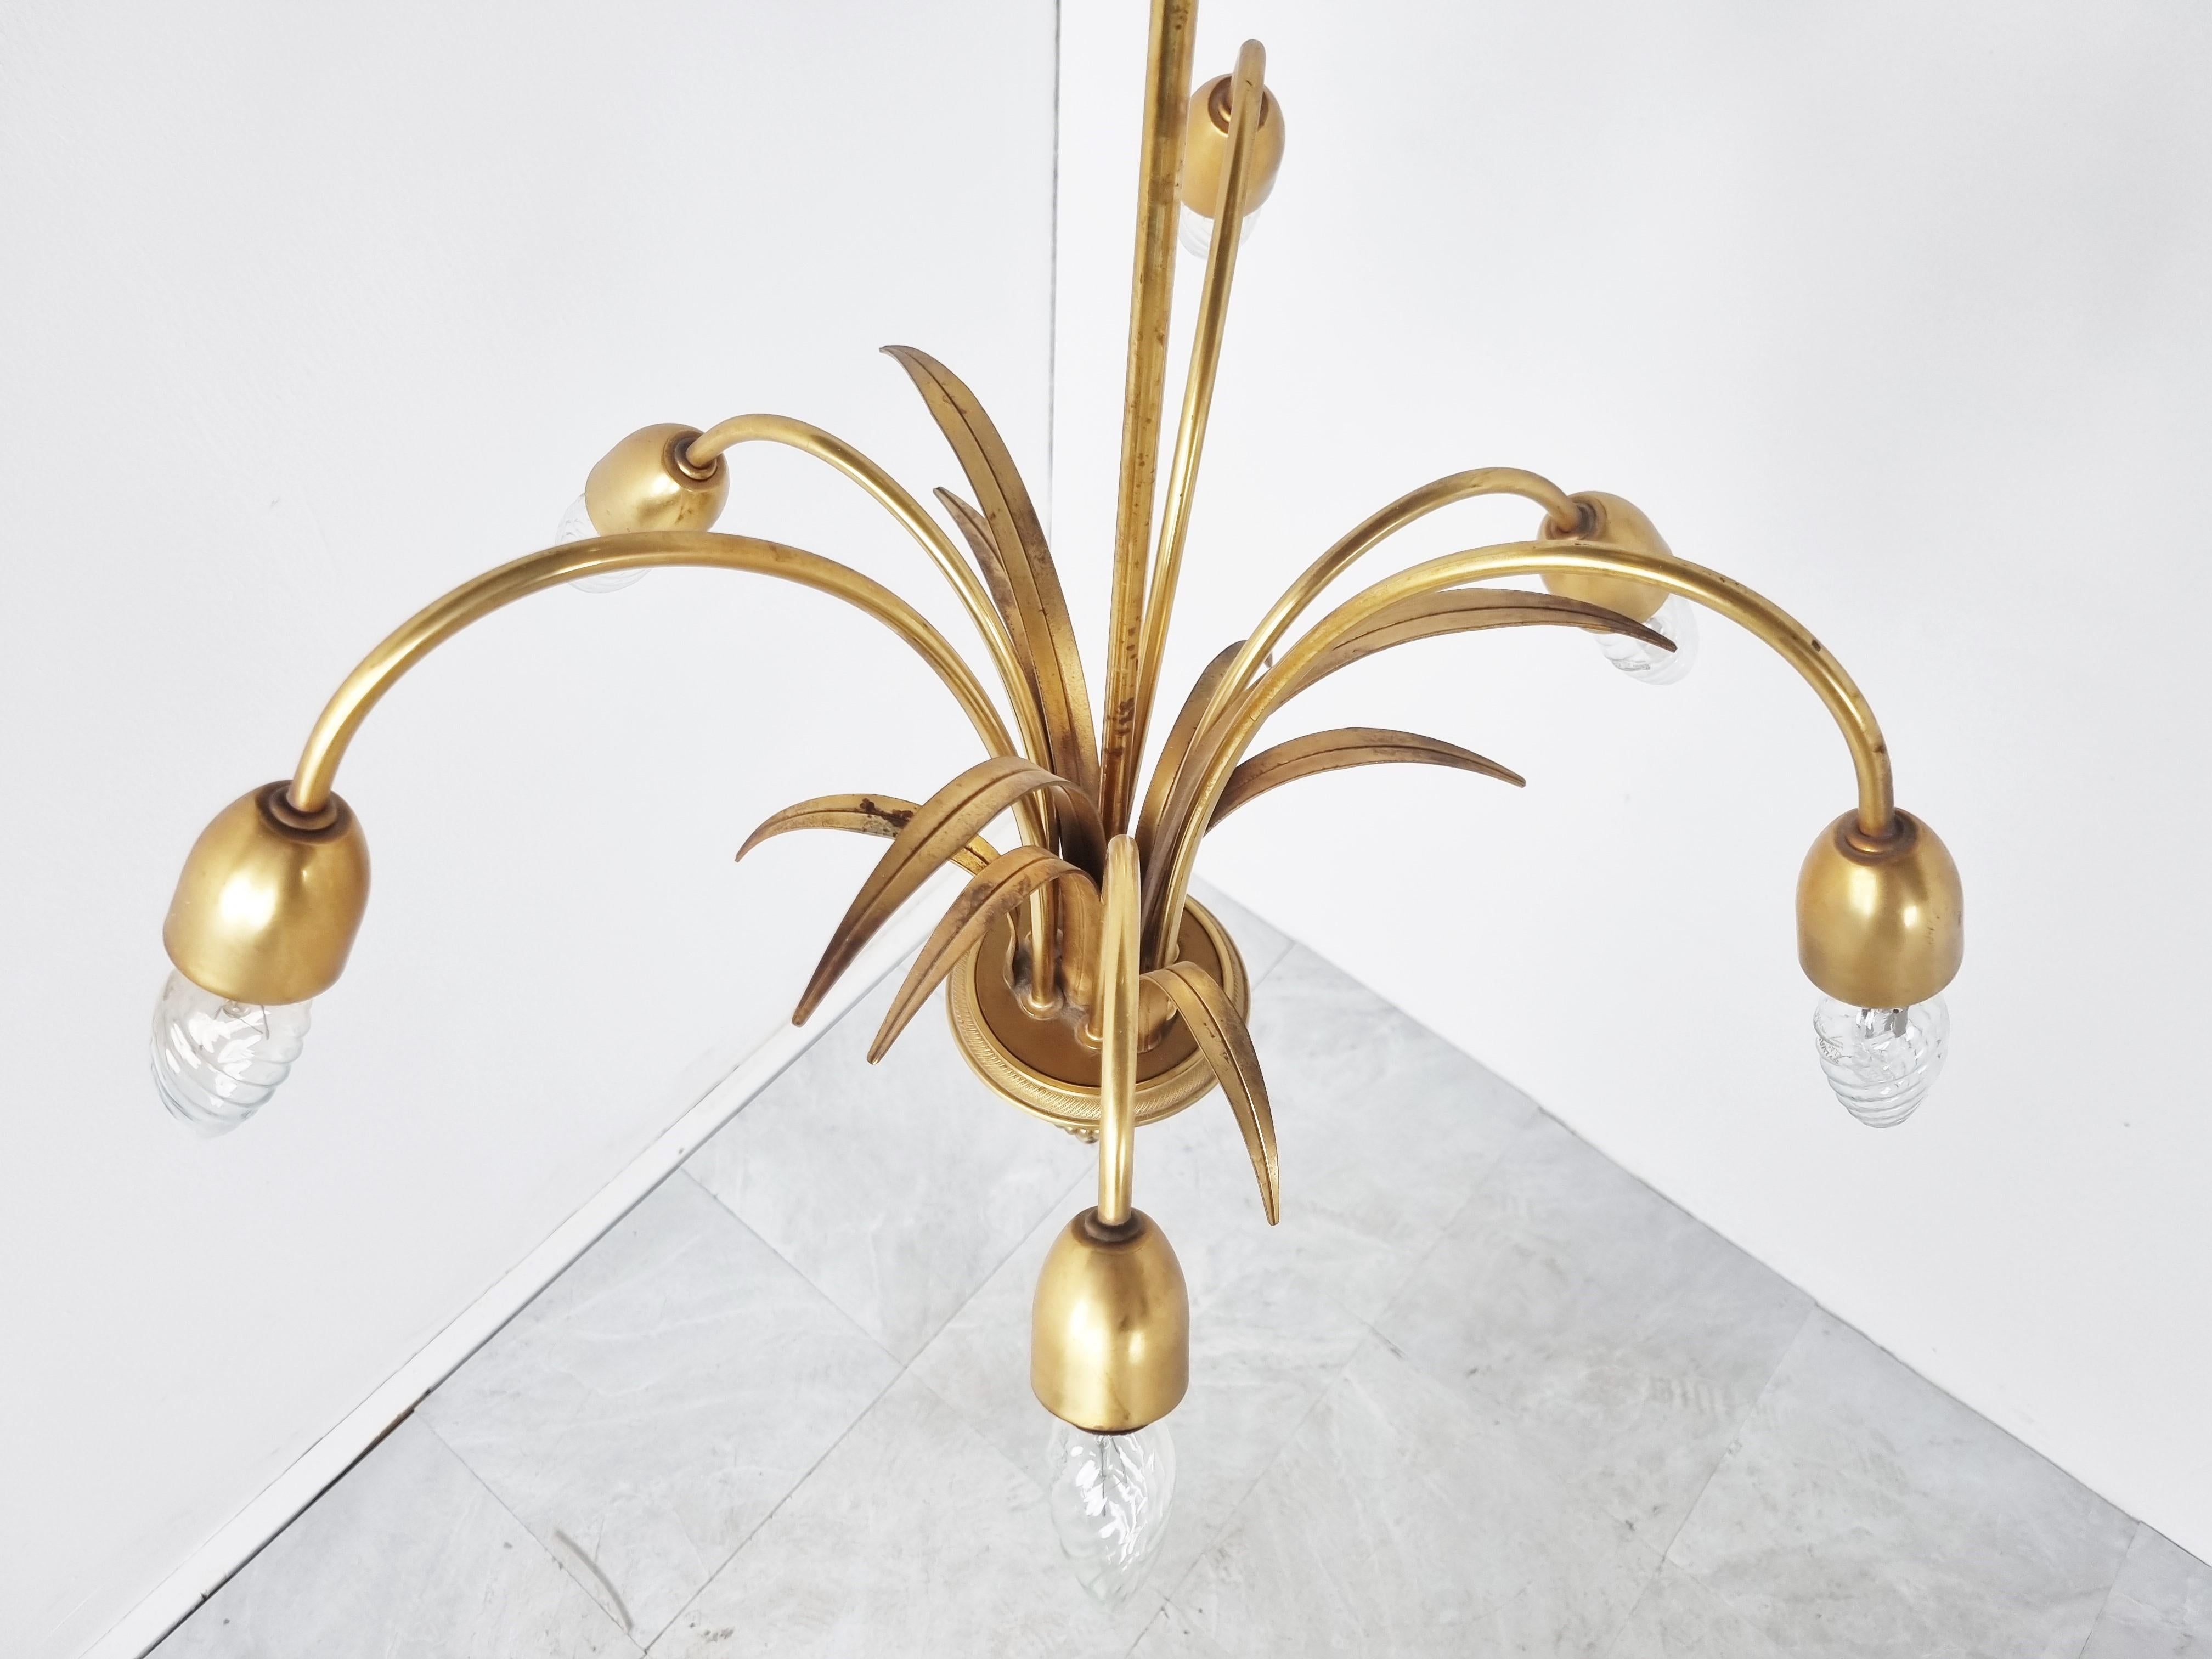 Elegant brass pineapple leaf chandelier by Boulanger, a Belgian lighting company.

Hollywood regency style

Good vintage condition with patina on the brass. Tested and ready for use with regular candelabra E14 light bulb sockets.

1970s,